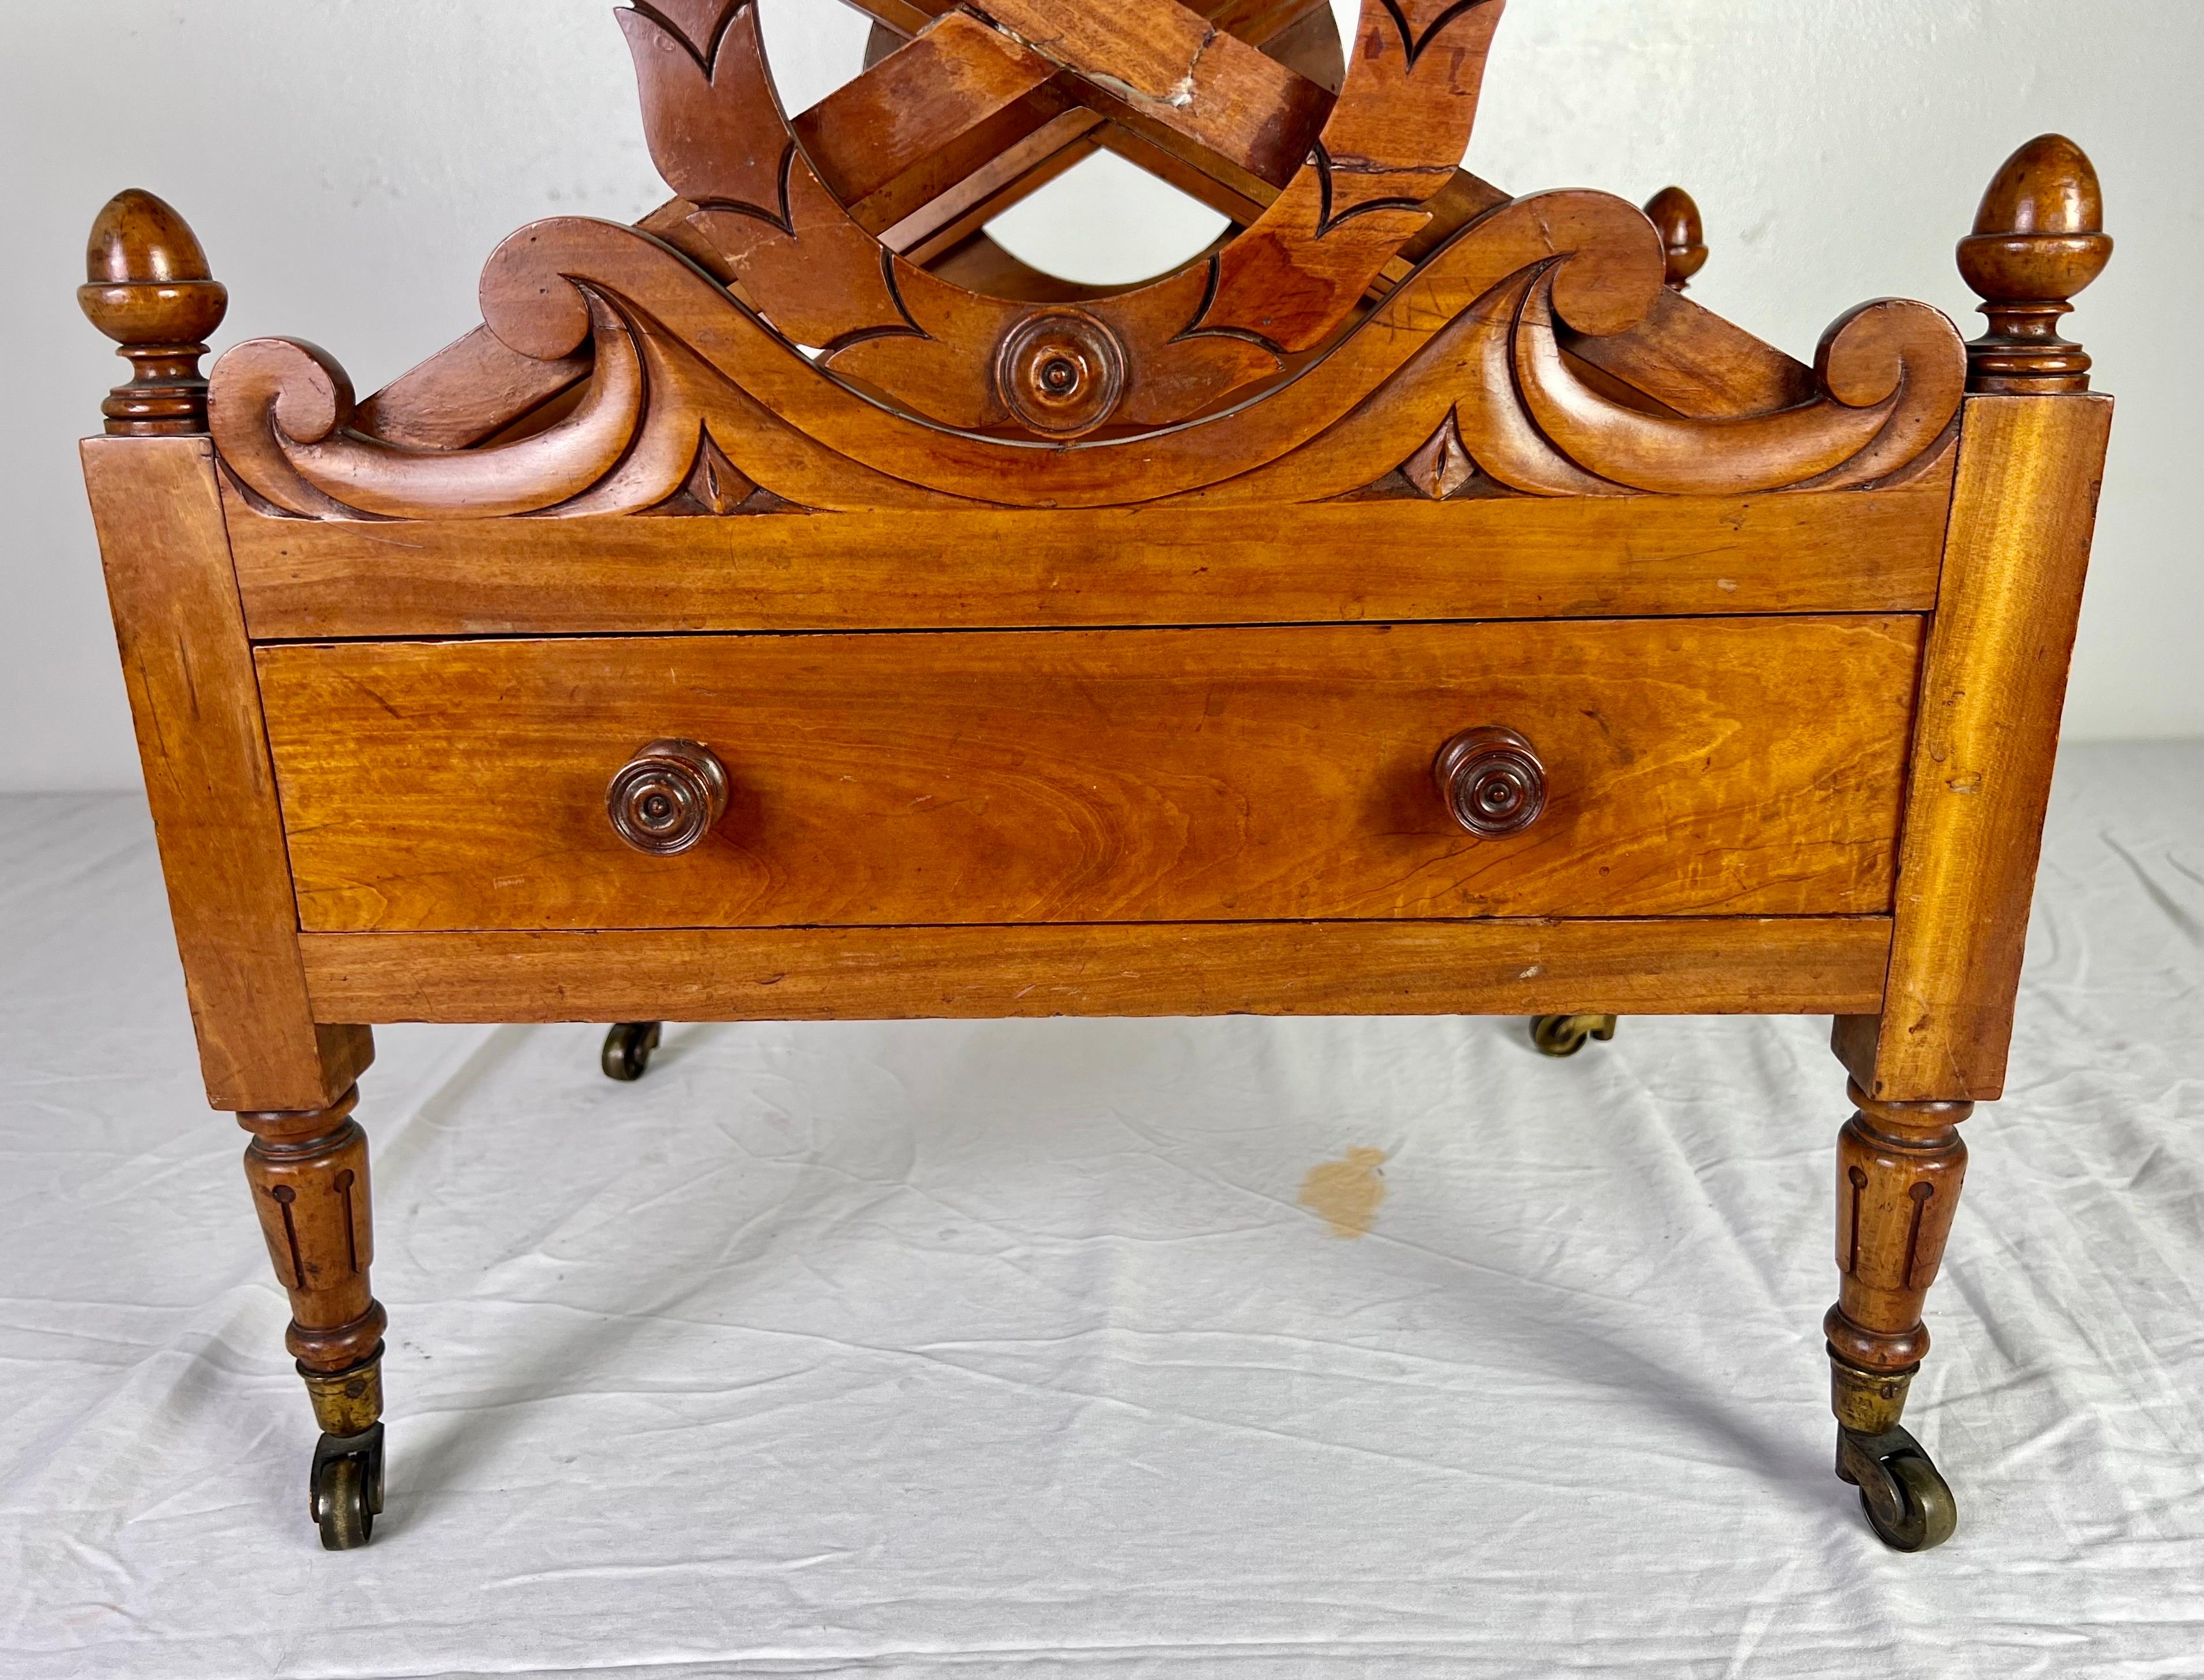 19th Century 19th C. English Maple Magazine Rack w/ Drawer and Casters For Sale